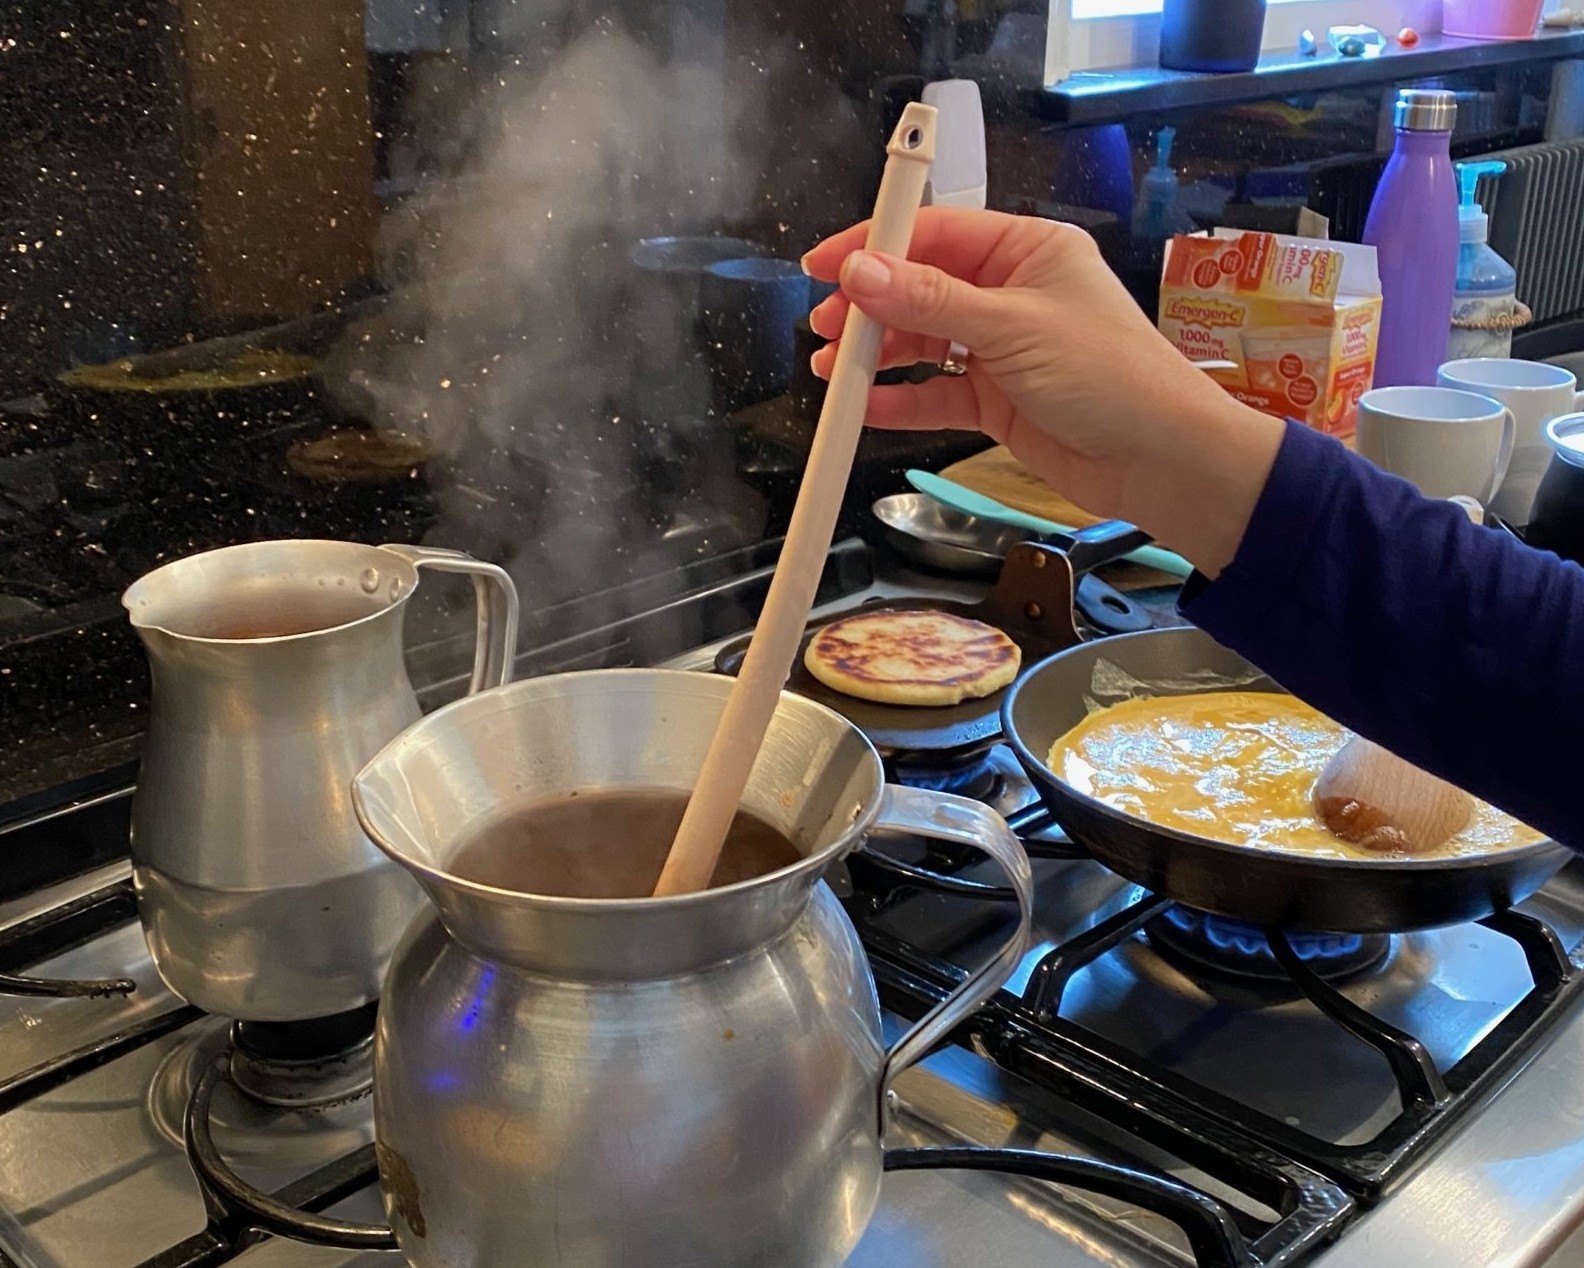 Cooking on a choch pot over the stove